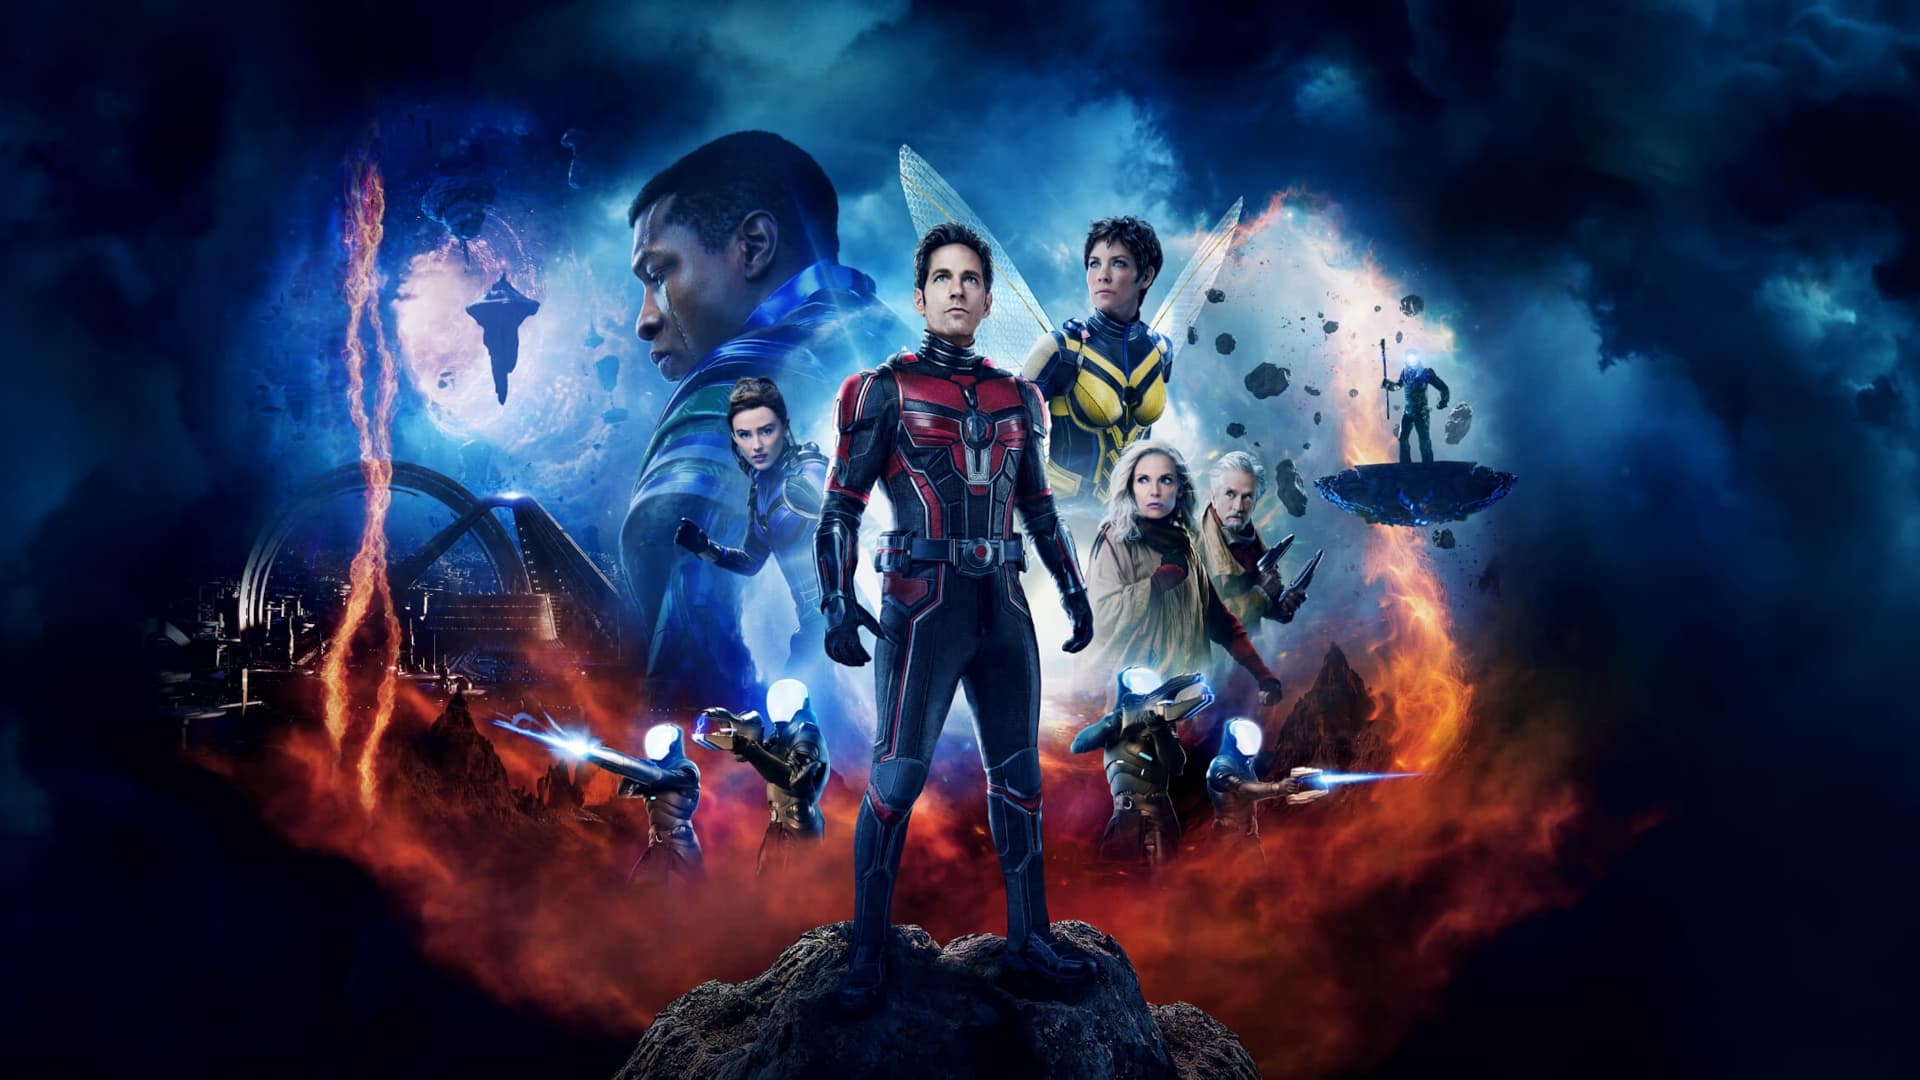 Another poster from the movie The Ant-Man and the Wasp: Quantumania (2023).